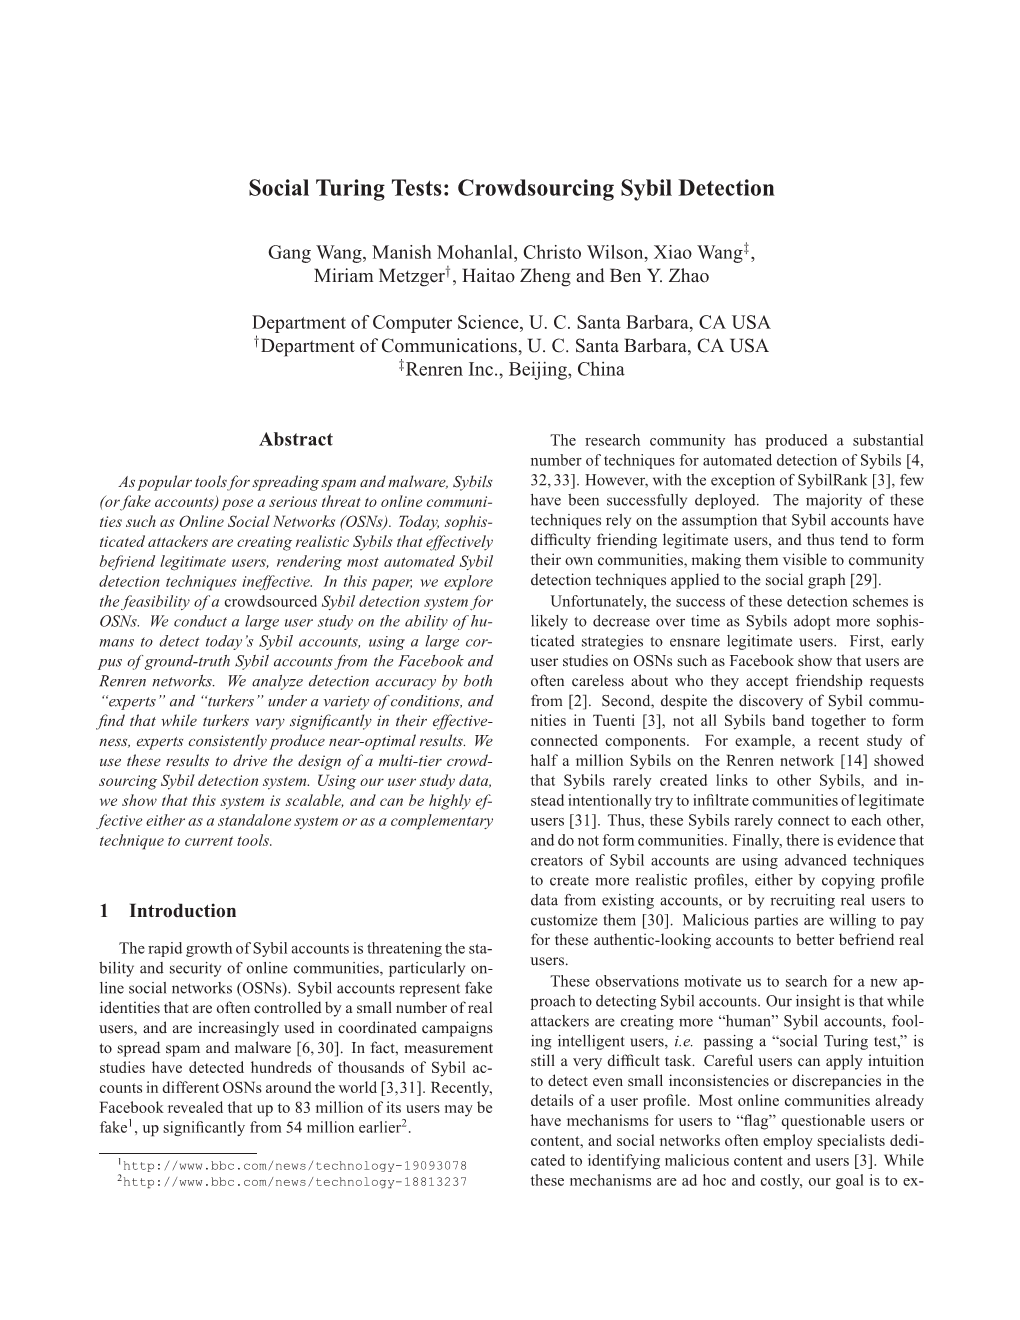 Social Turing Tests: Crowdsourcing Sybil Detection